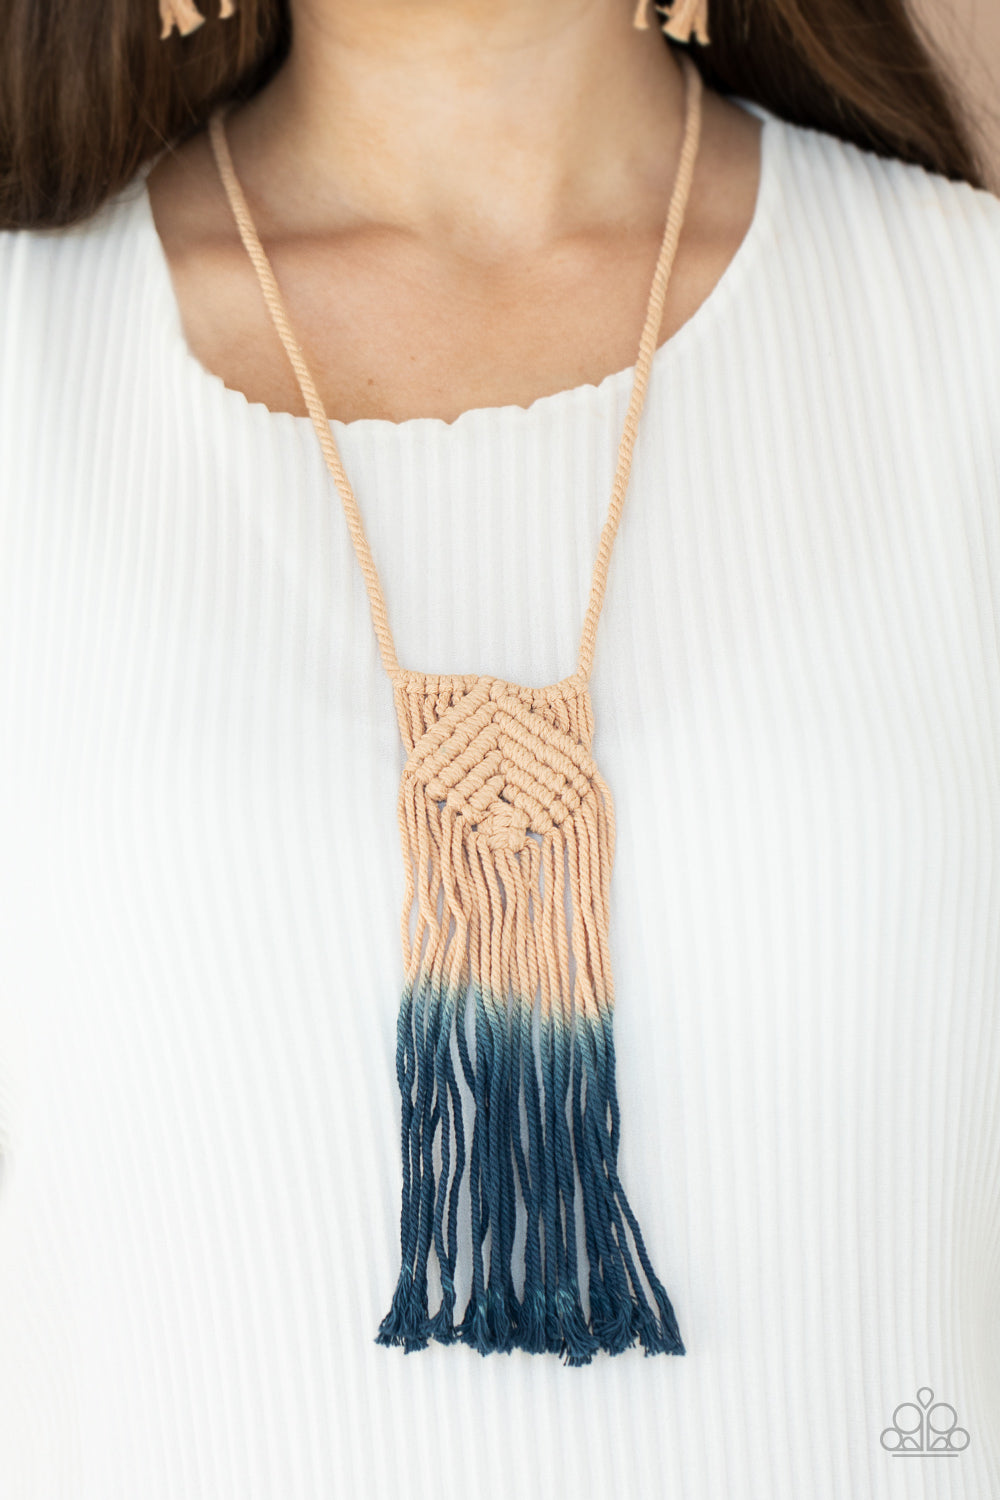 Look At MACRAME Now - Blue/Tan necklace